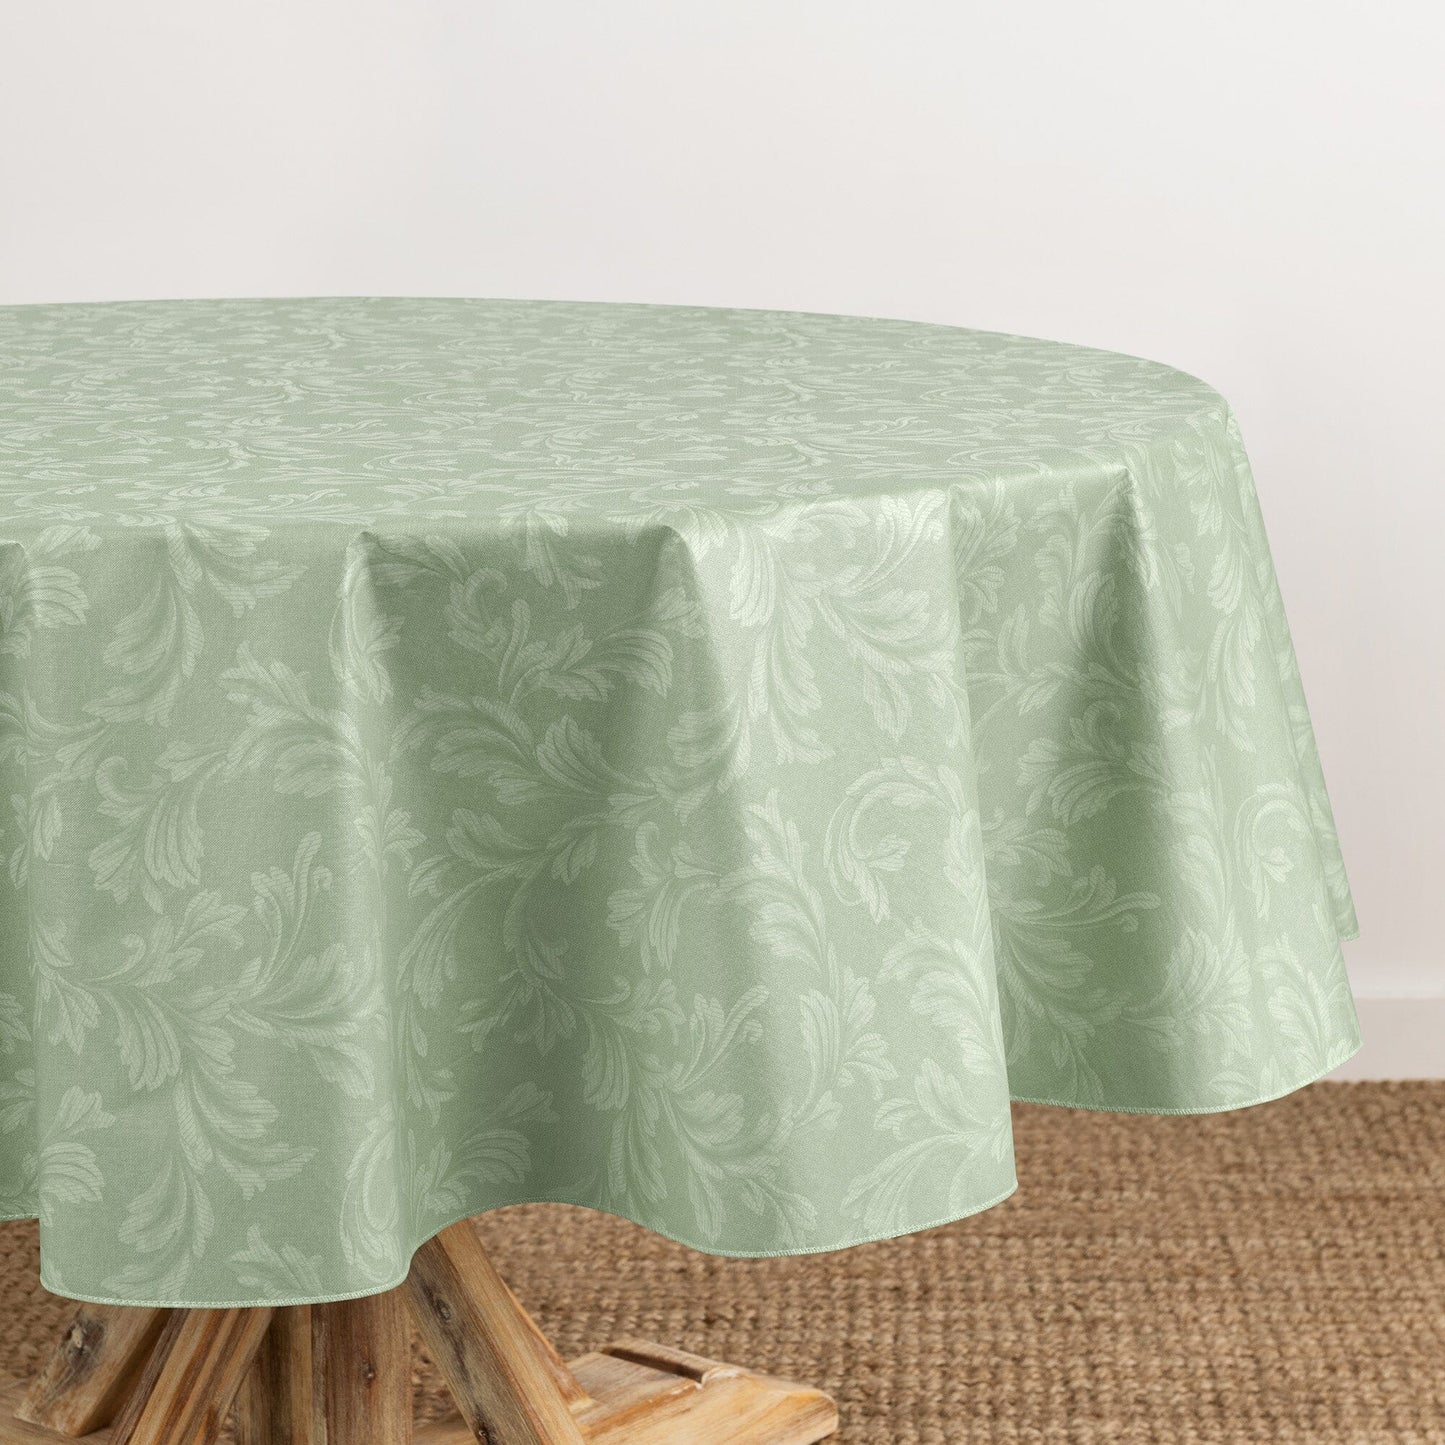 Camile Floral Scroll Damask Pattern Vinyl Indoor/Outdoor Tablecloth